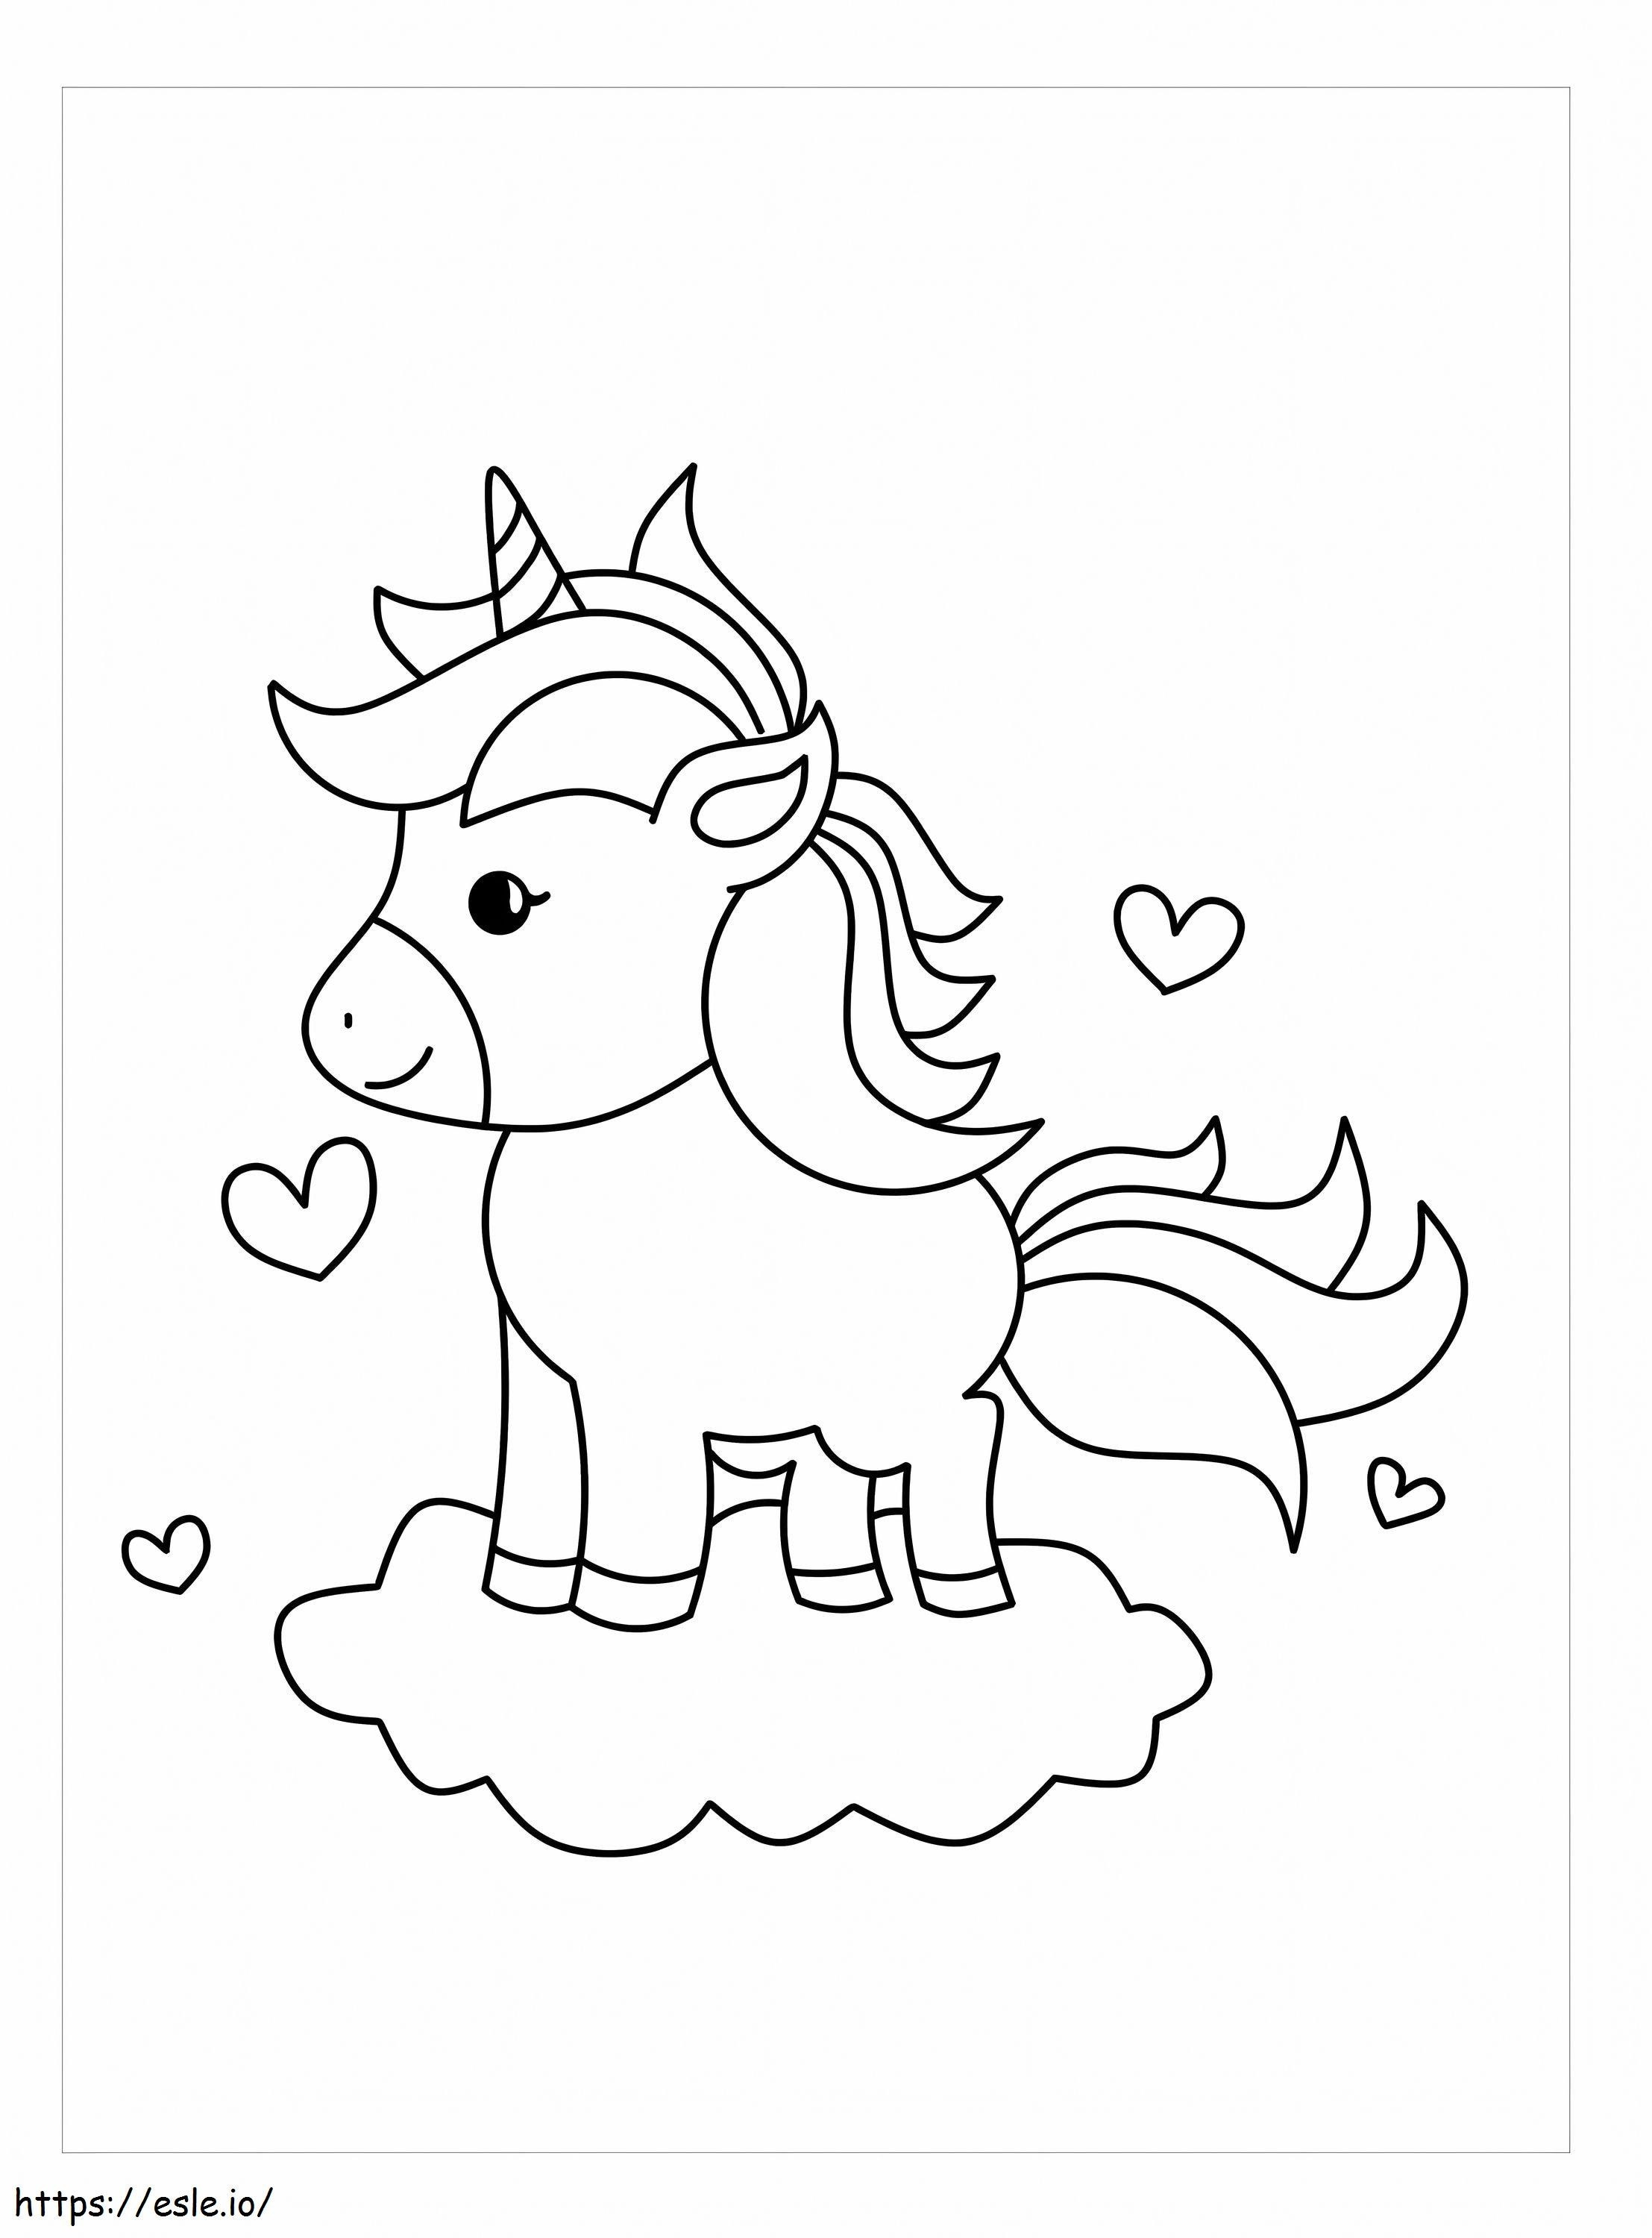 Little Unicorn In The Cloud coloring page